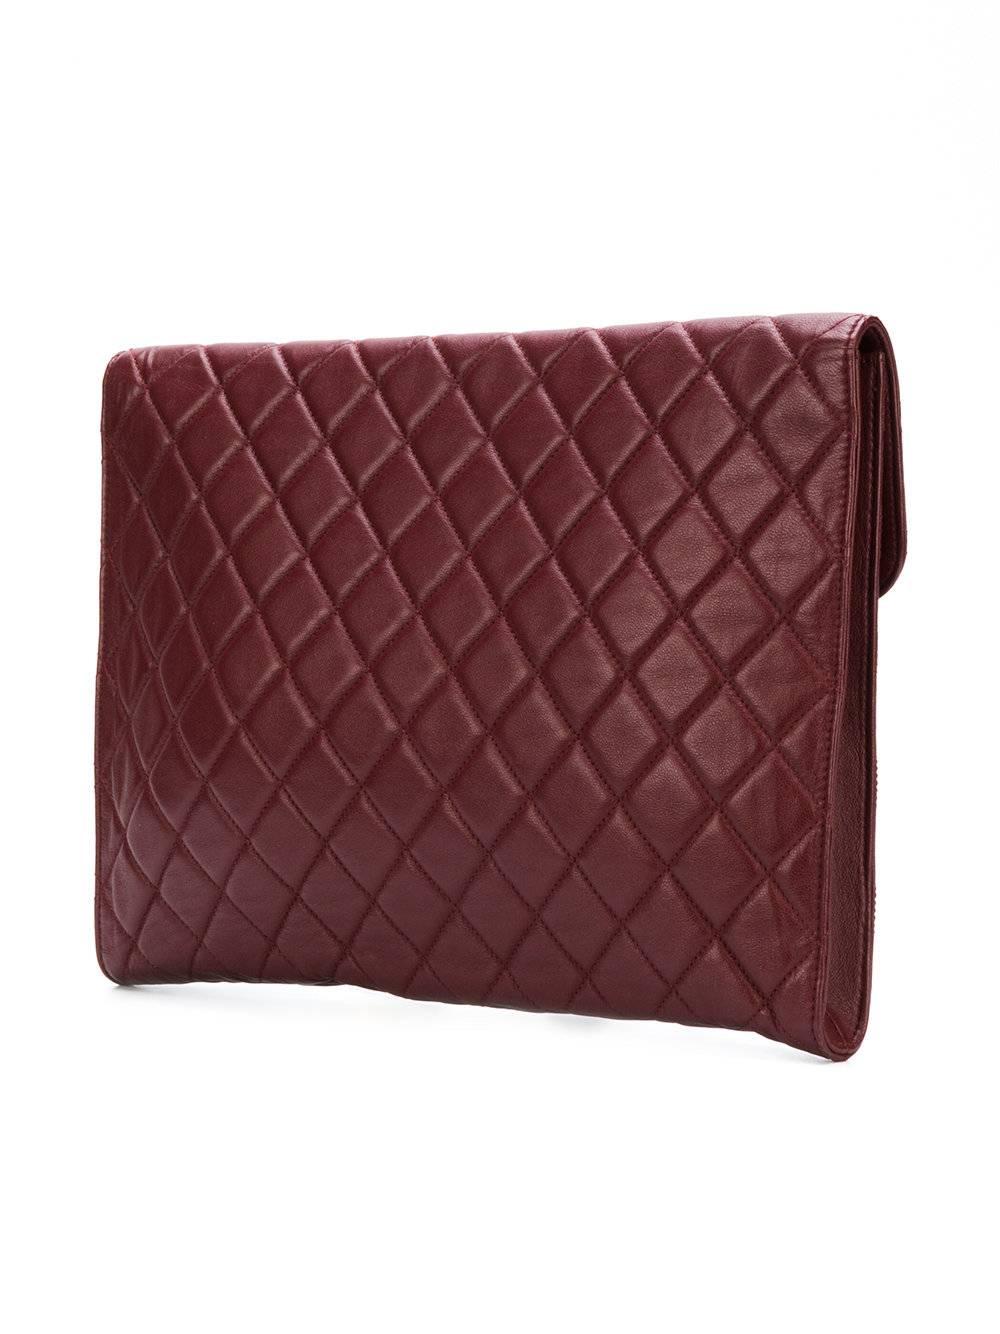 Burgundy lambskin CC oversized clutch featuring a foldover top with snap closure, a main internal compartment and a diamond quilted finish.

Colour: Burgundy

Composition: Lambskin

Measurements: W: 34cm, H: 26cm, D: 3cm

Condition: 9/10